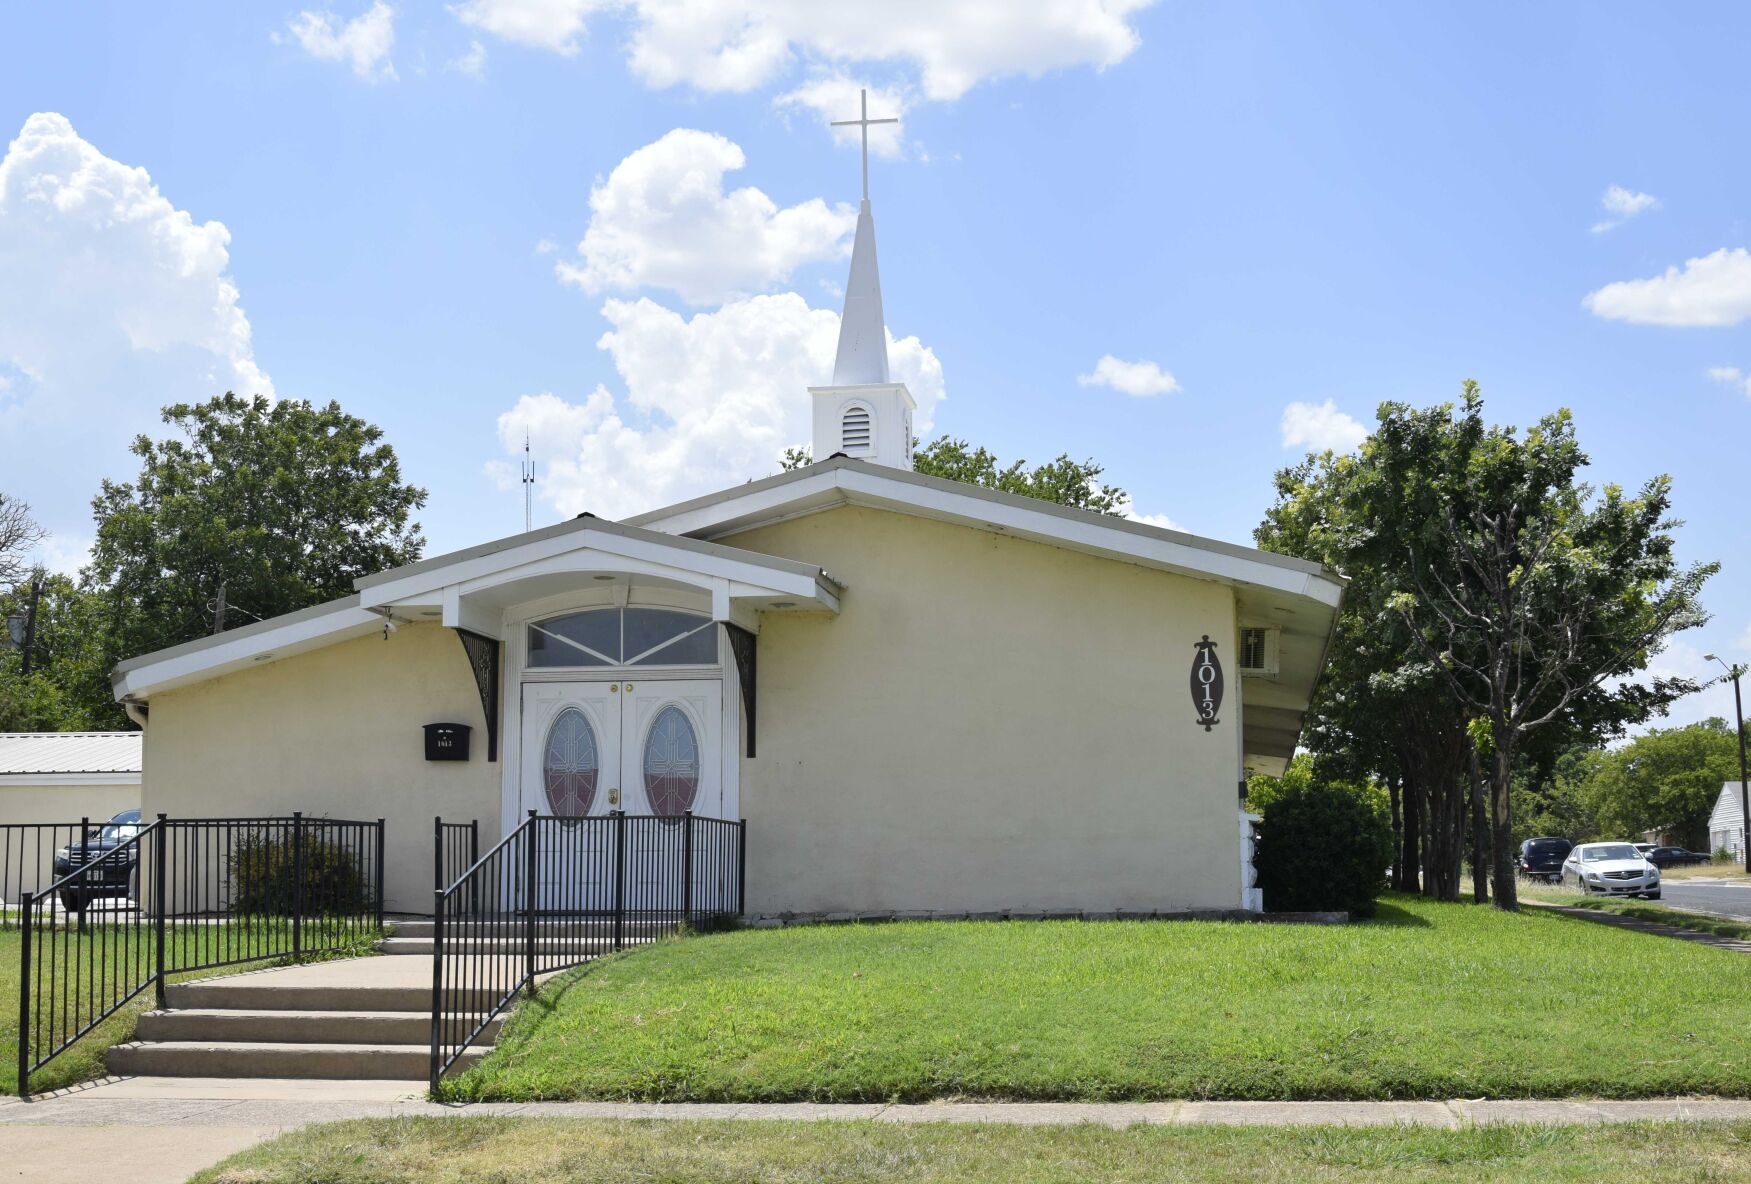 Killeen “cult” church linked to others in three states Local News kdhnews